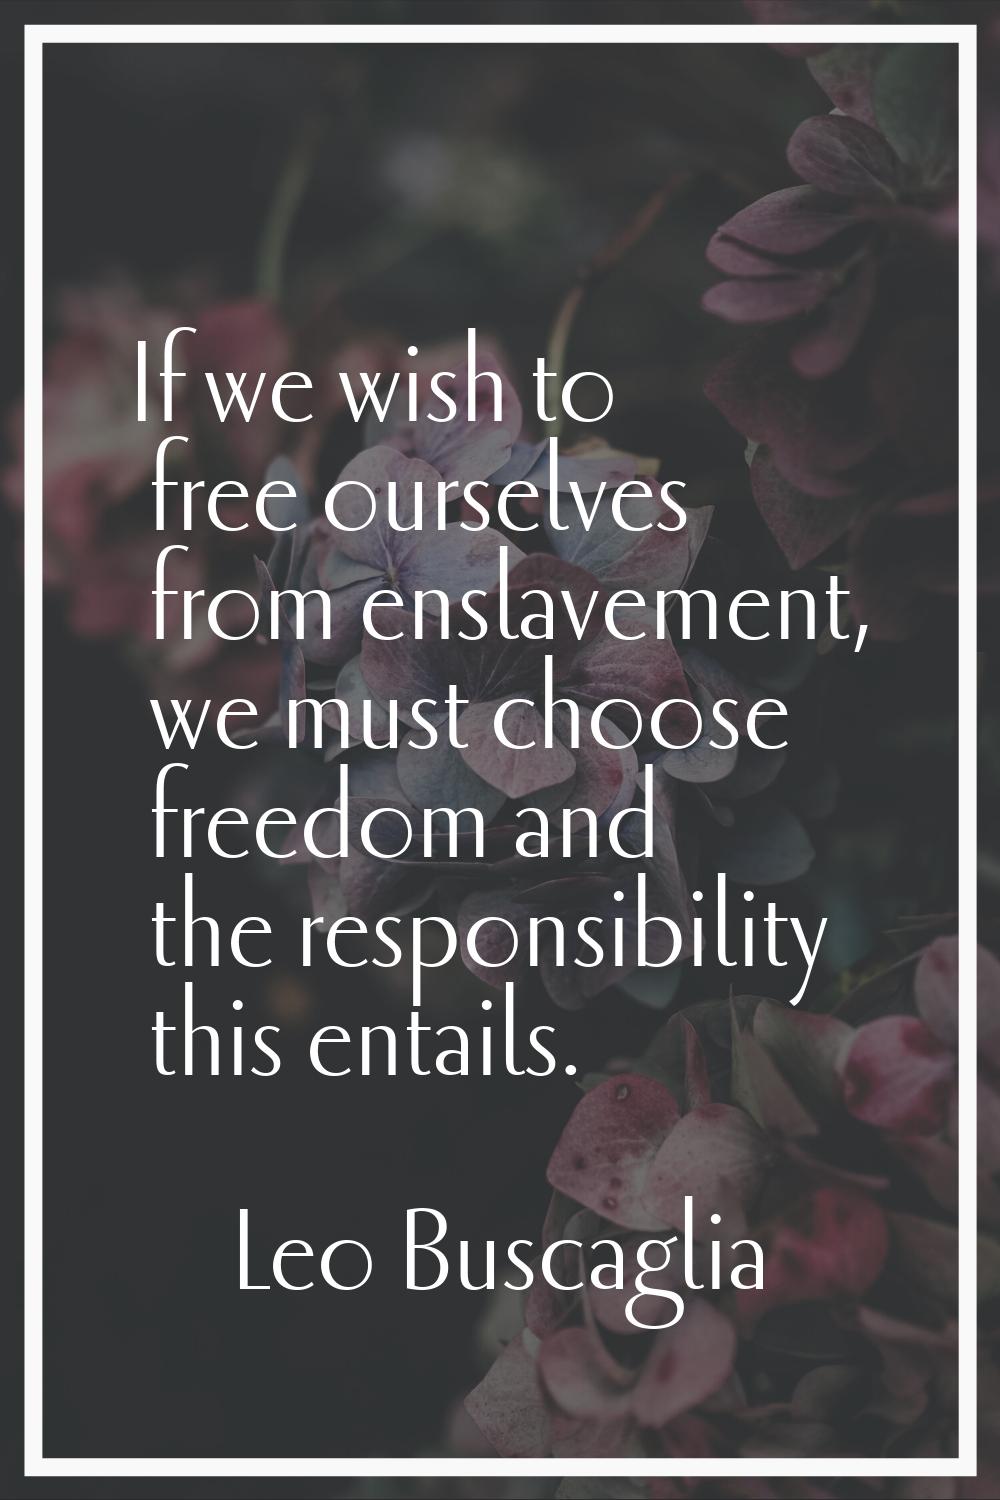 If we wish to free ourselves from enslavement, we must choose freedom and the responsibility this e